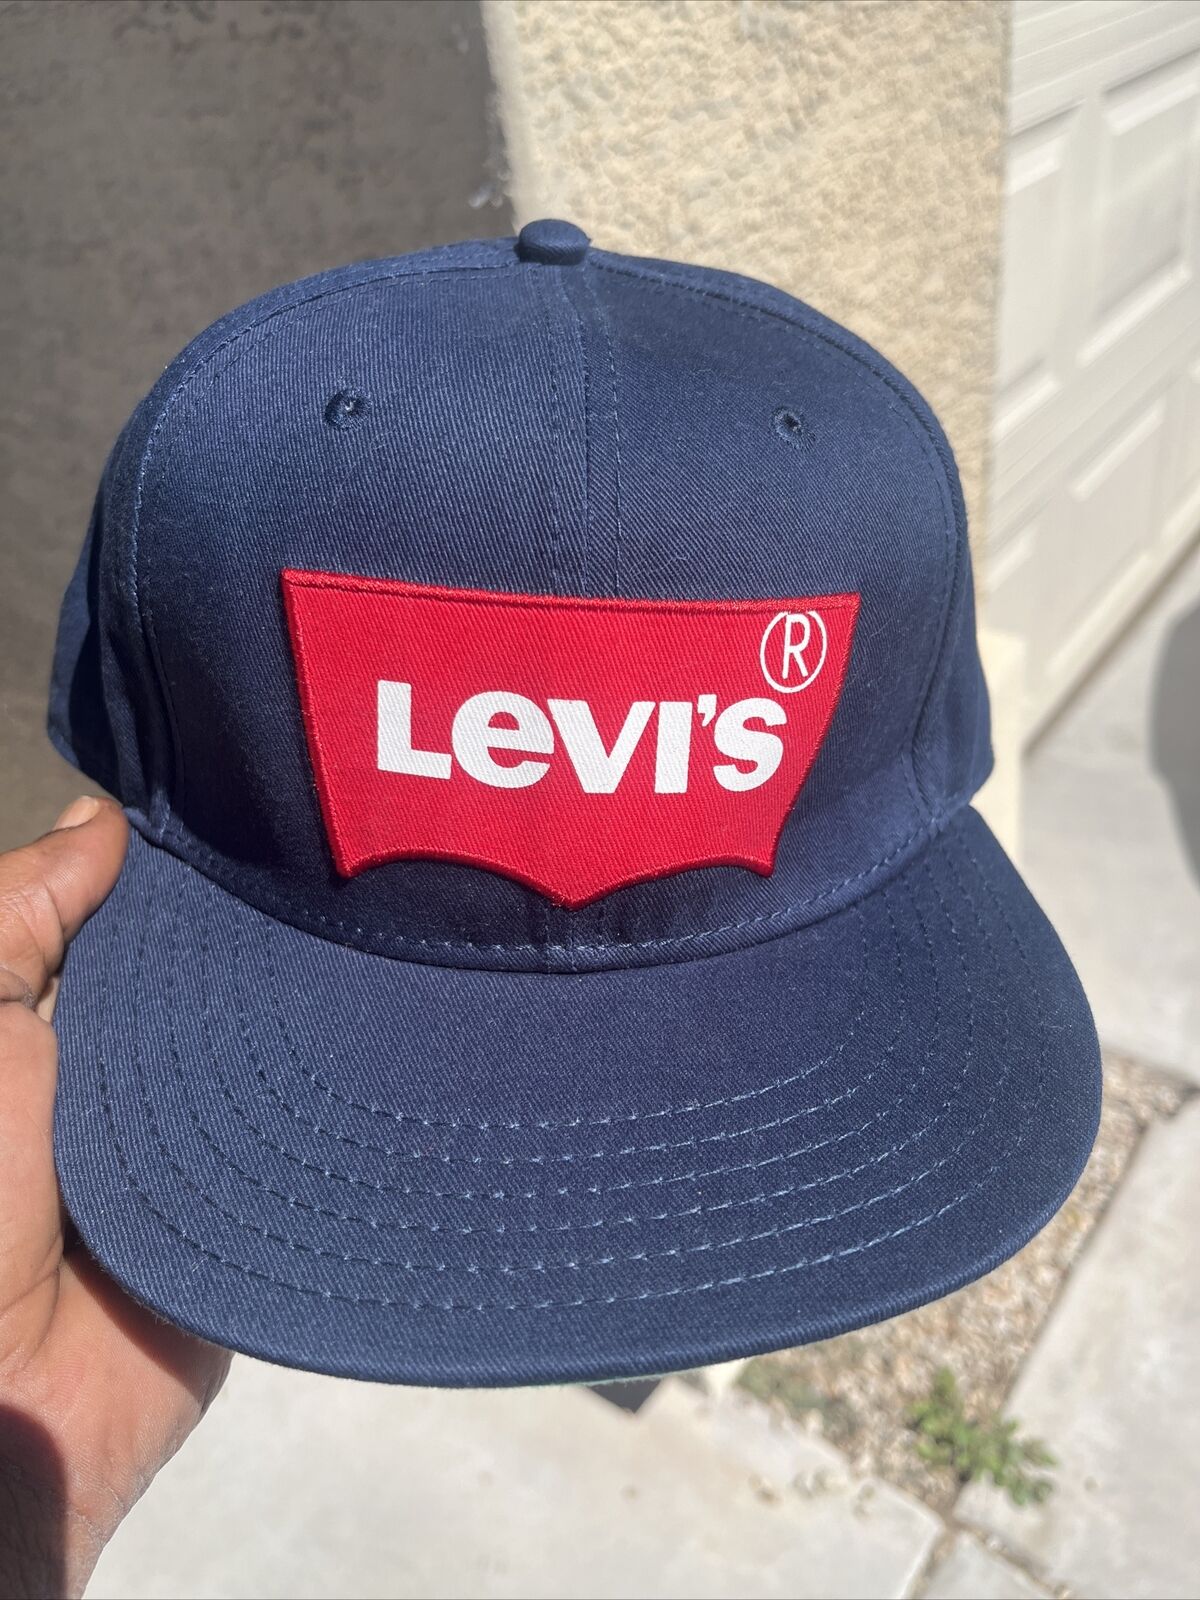 Levi’s Navy blue Hat Preowned - image 11